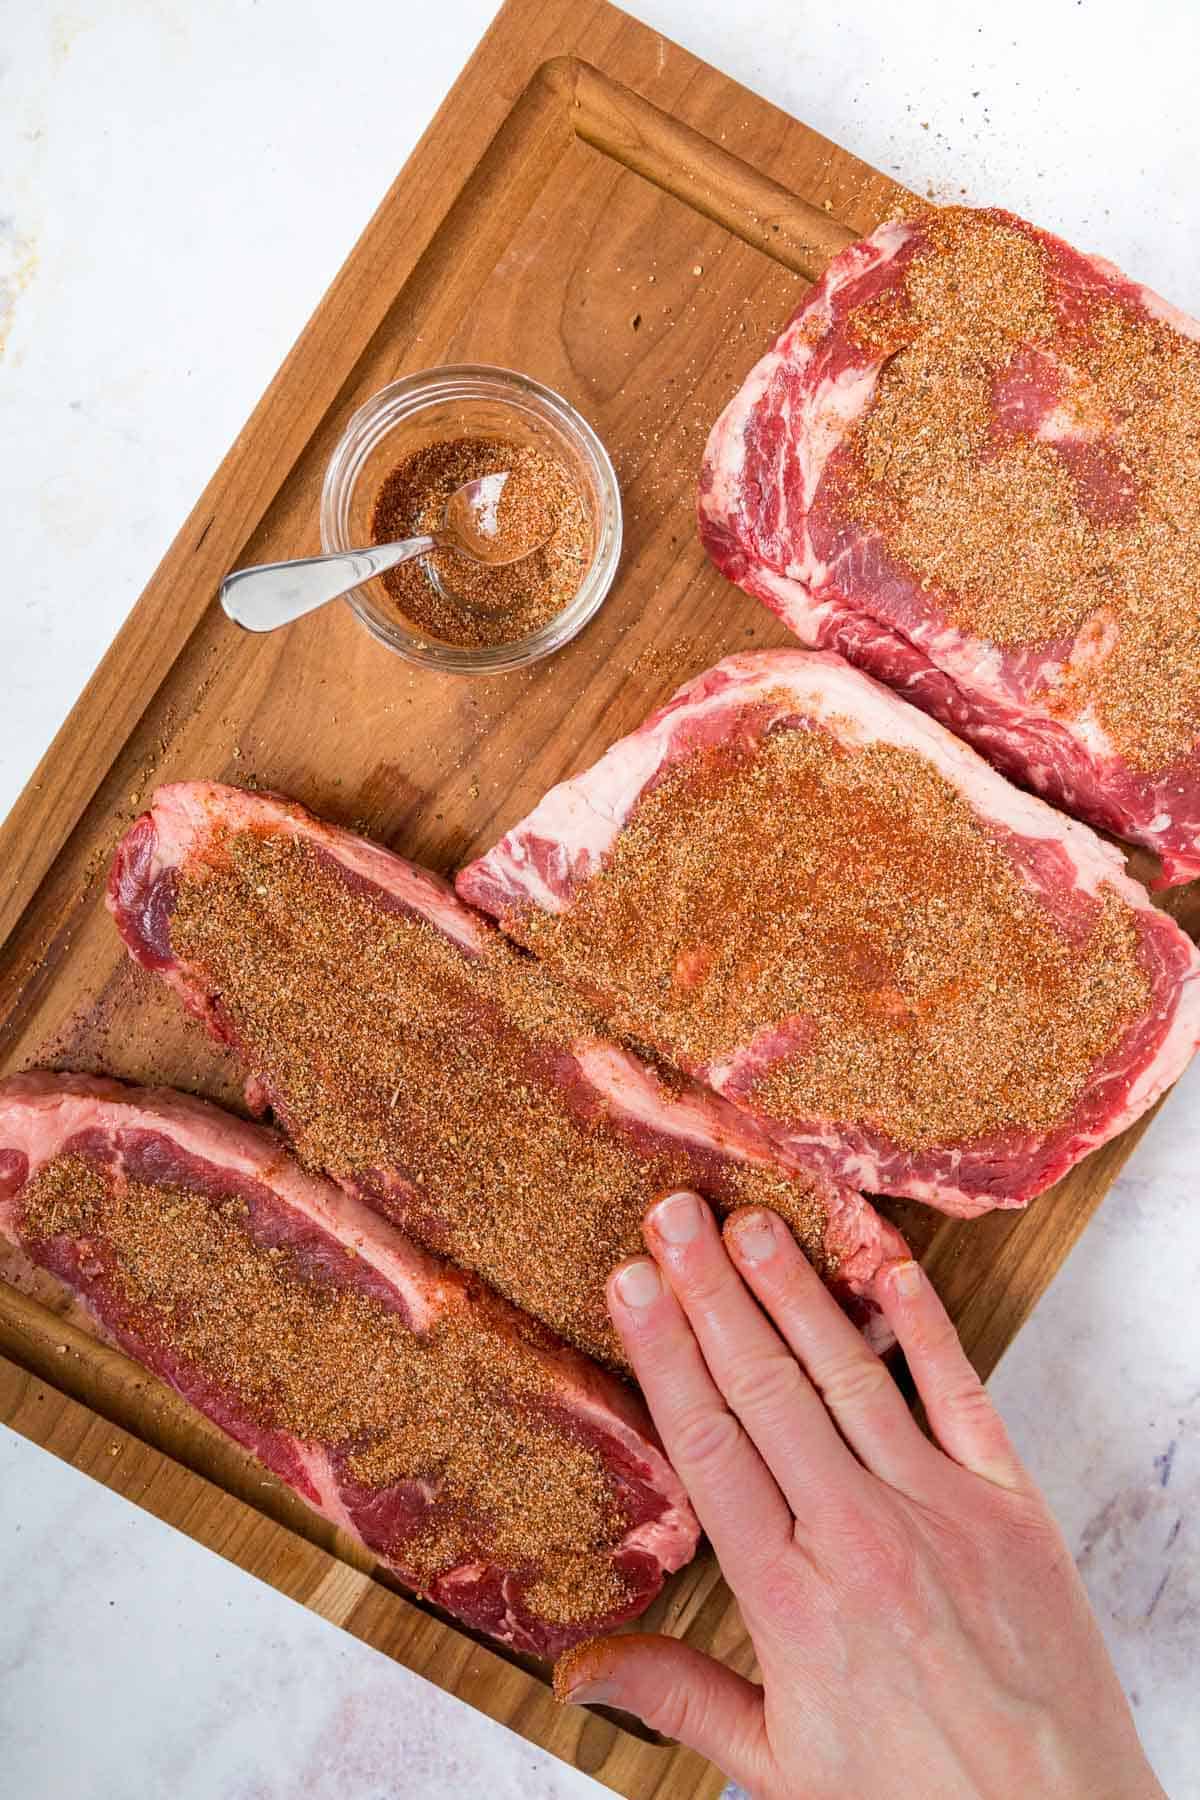 The Spice Mixture Being Rubbed Onto the Second Side of the Steaks